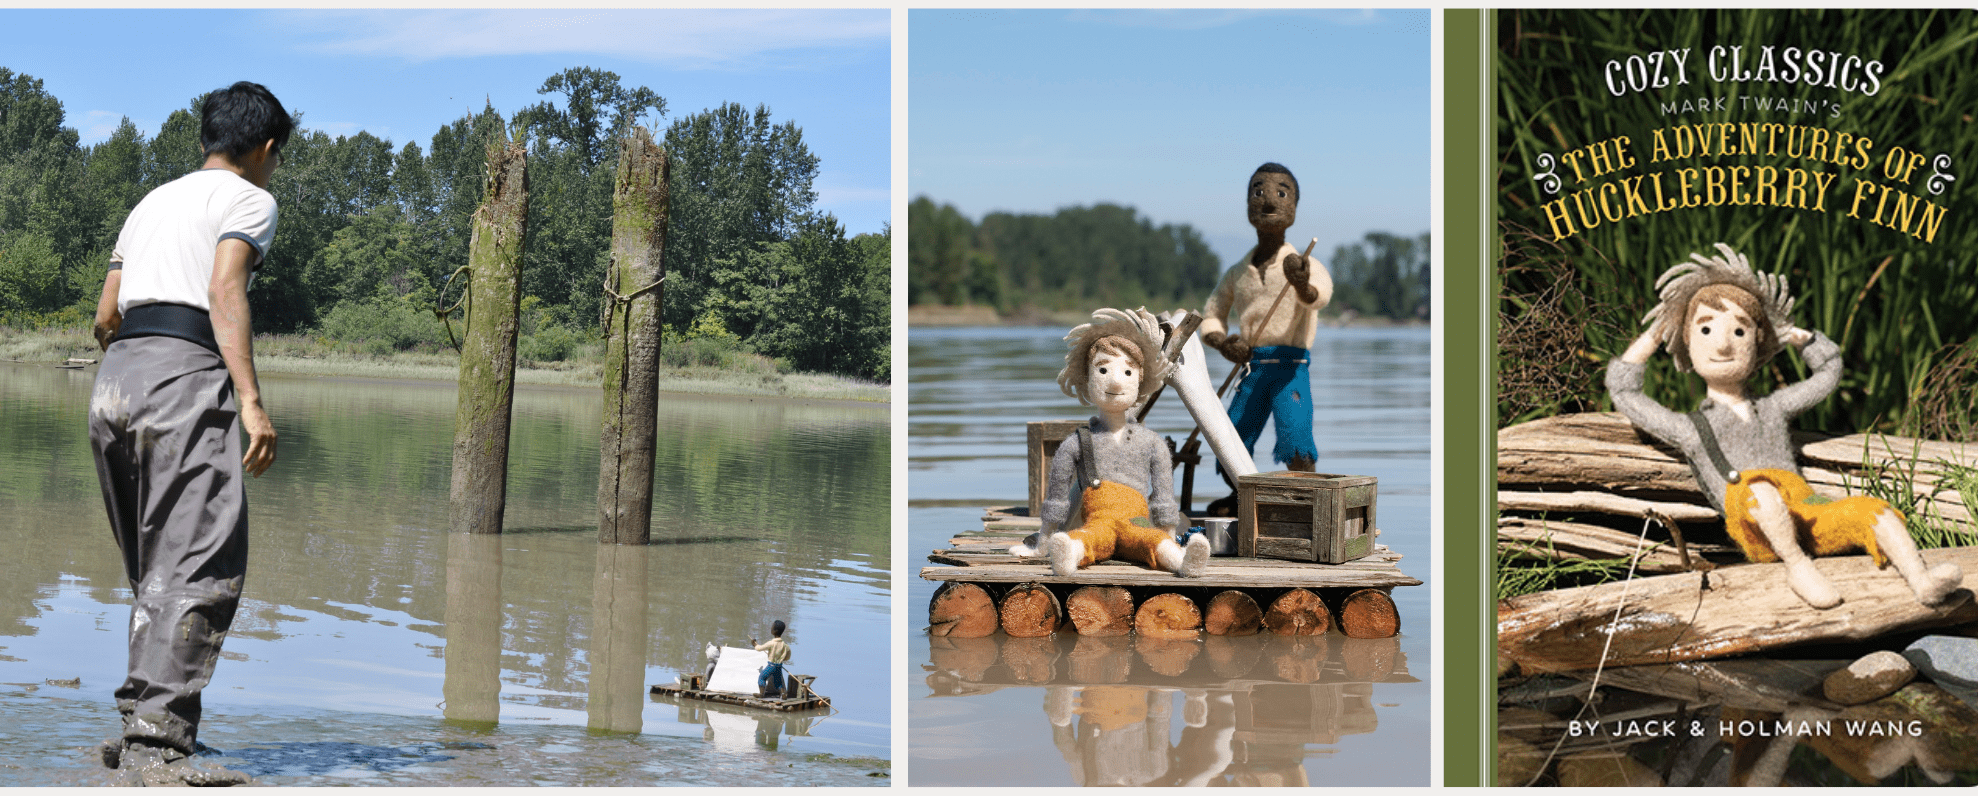 Image description: three images depicting needle-felted scenes in miniature. On the left, the setup on a river bank. In the centre, the professional photo for publication. On the right, a similar image on a book cover.